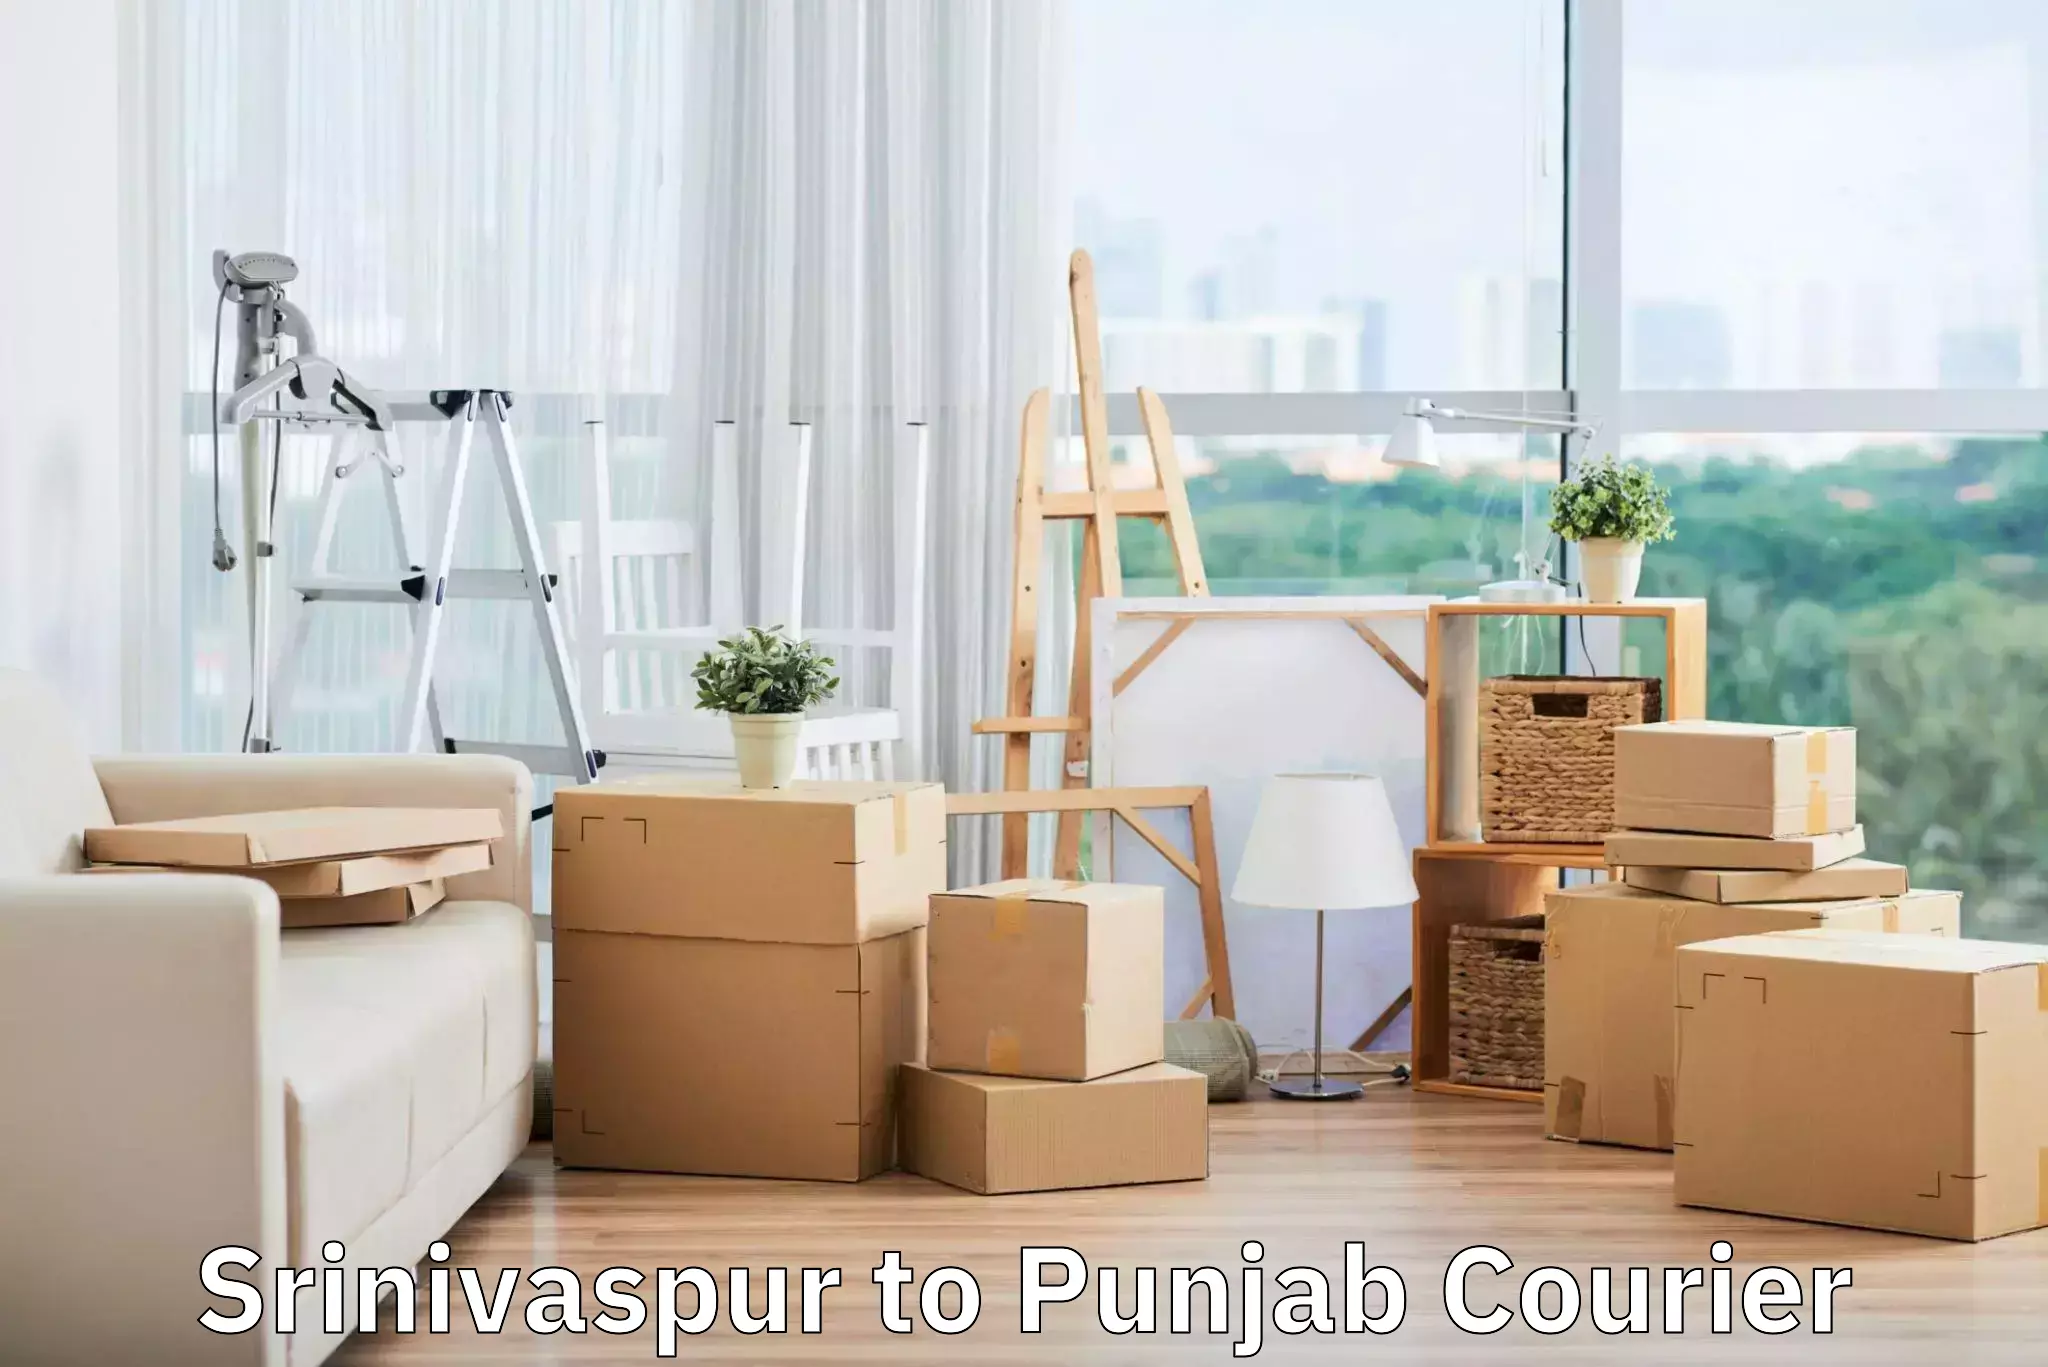 Luggage delivery calculator in Srinivaspur to Punjab